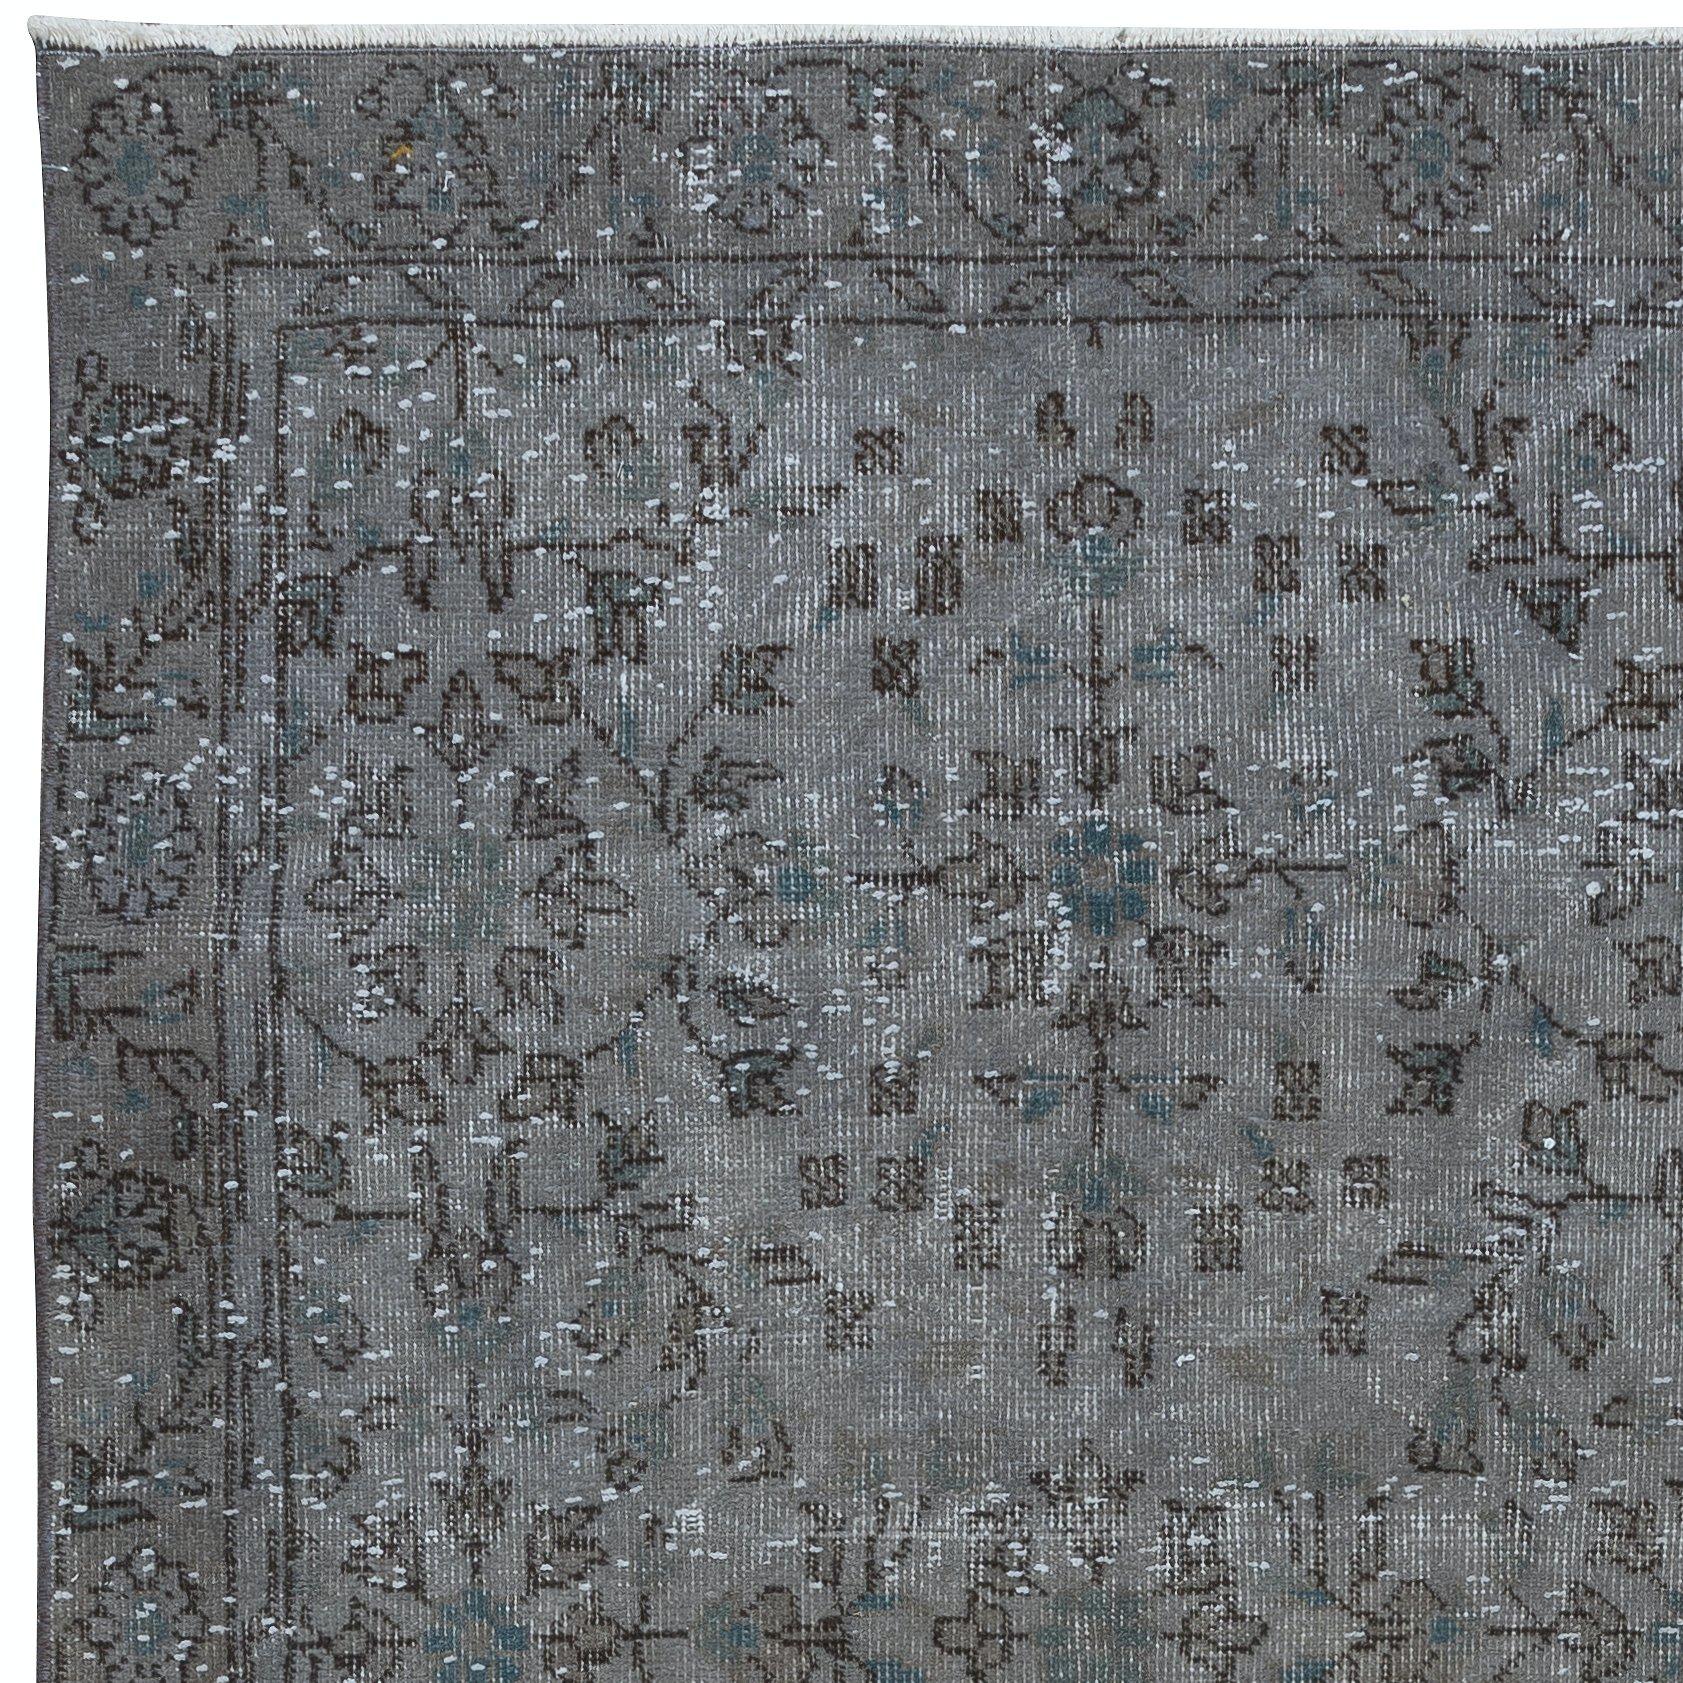 Hand-Woven 3.5x6.3 Ft Contemporary Turkish Handmade Rug with Teal Blue Details & Grey Field For Sale